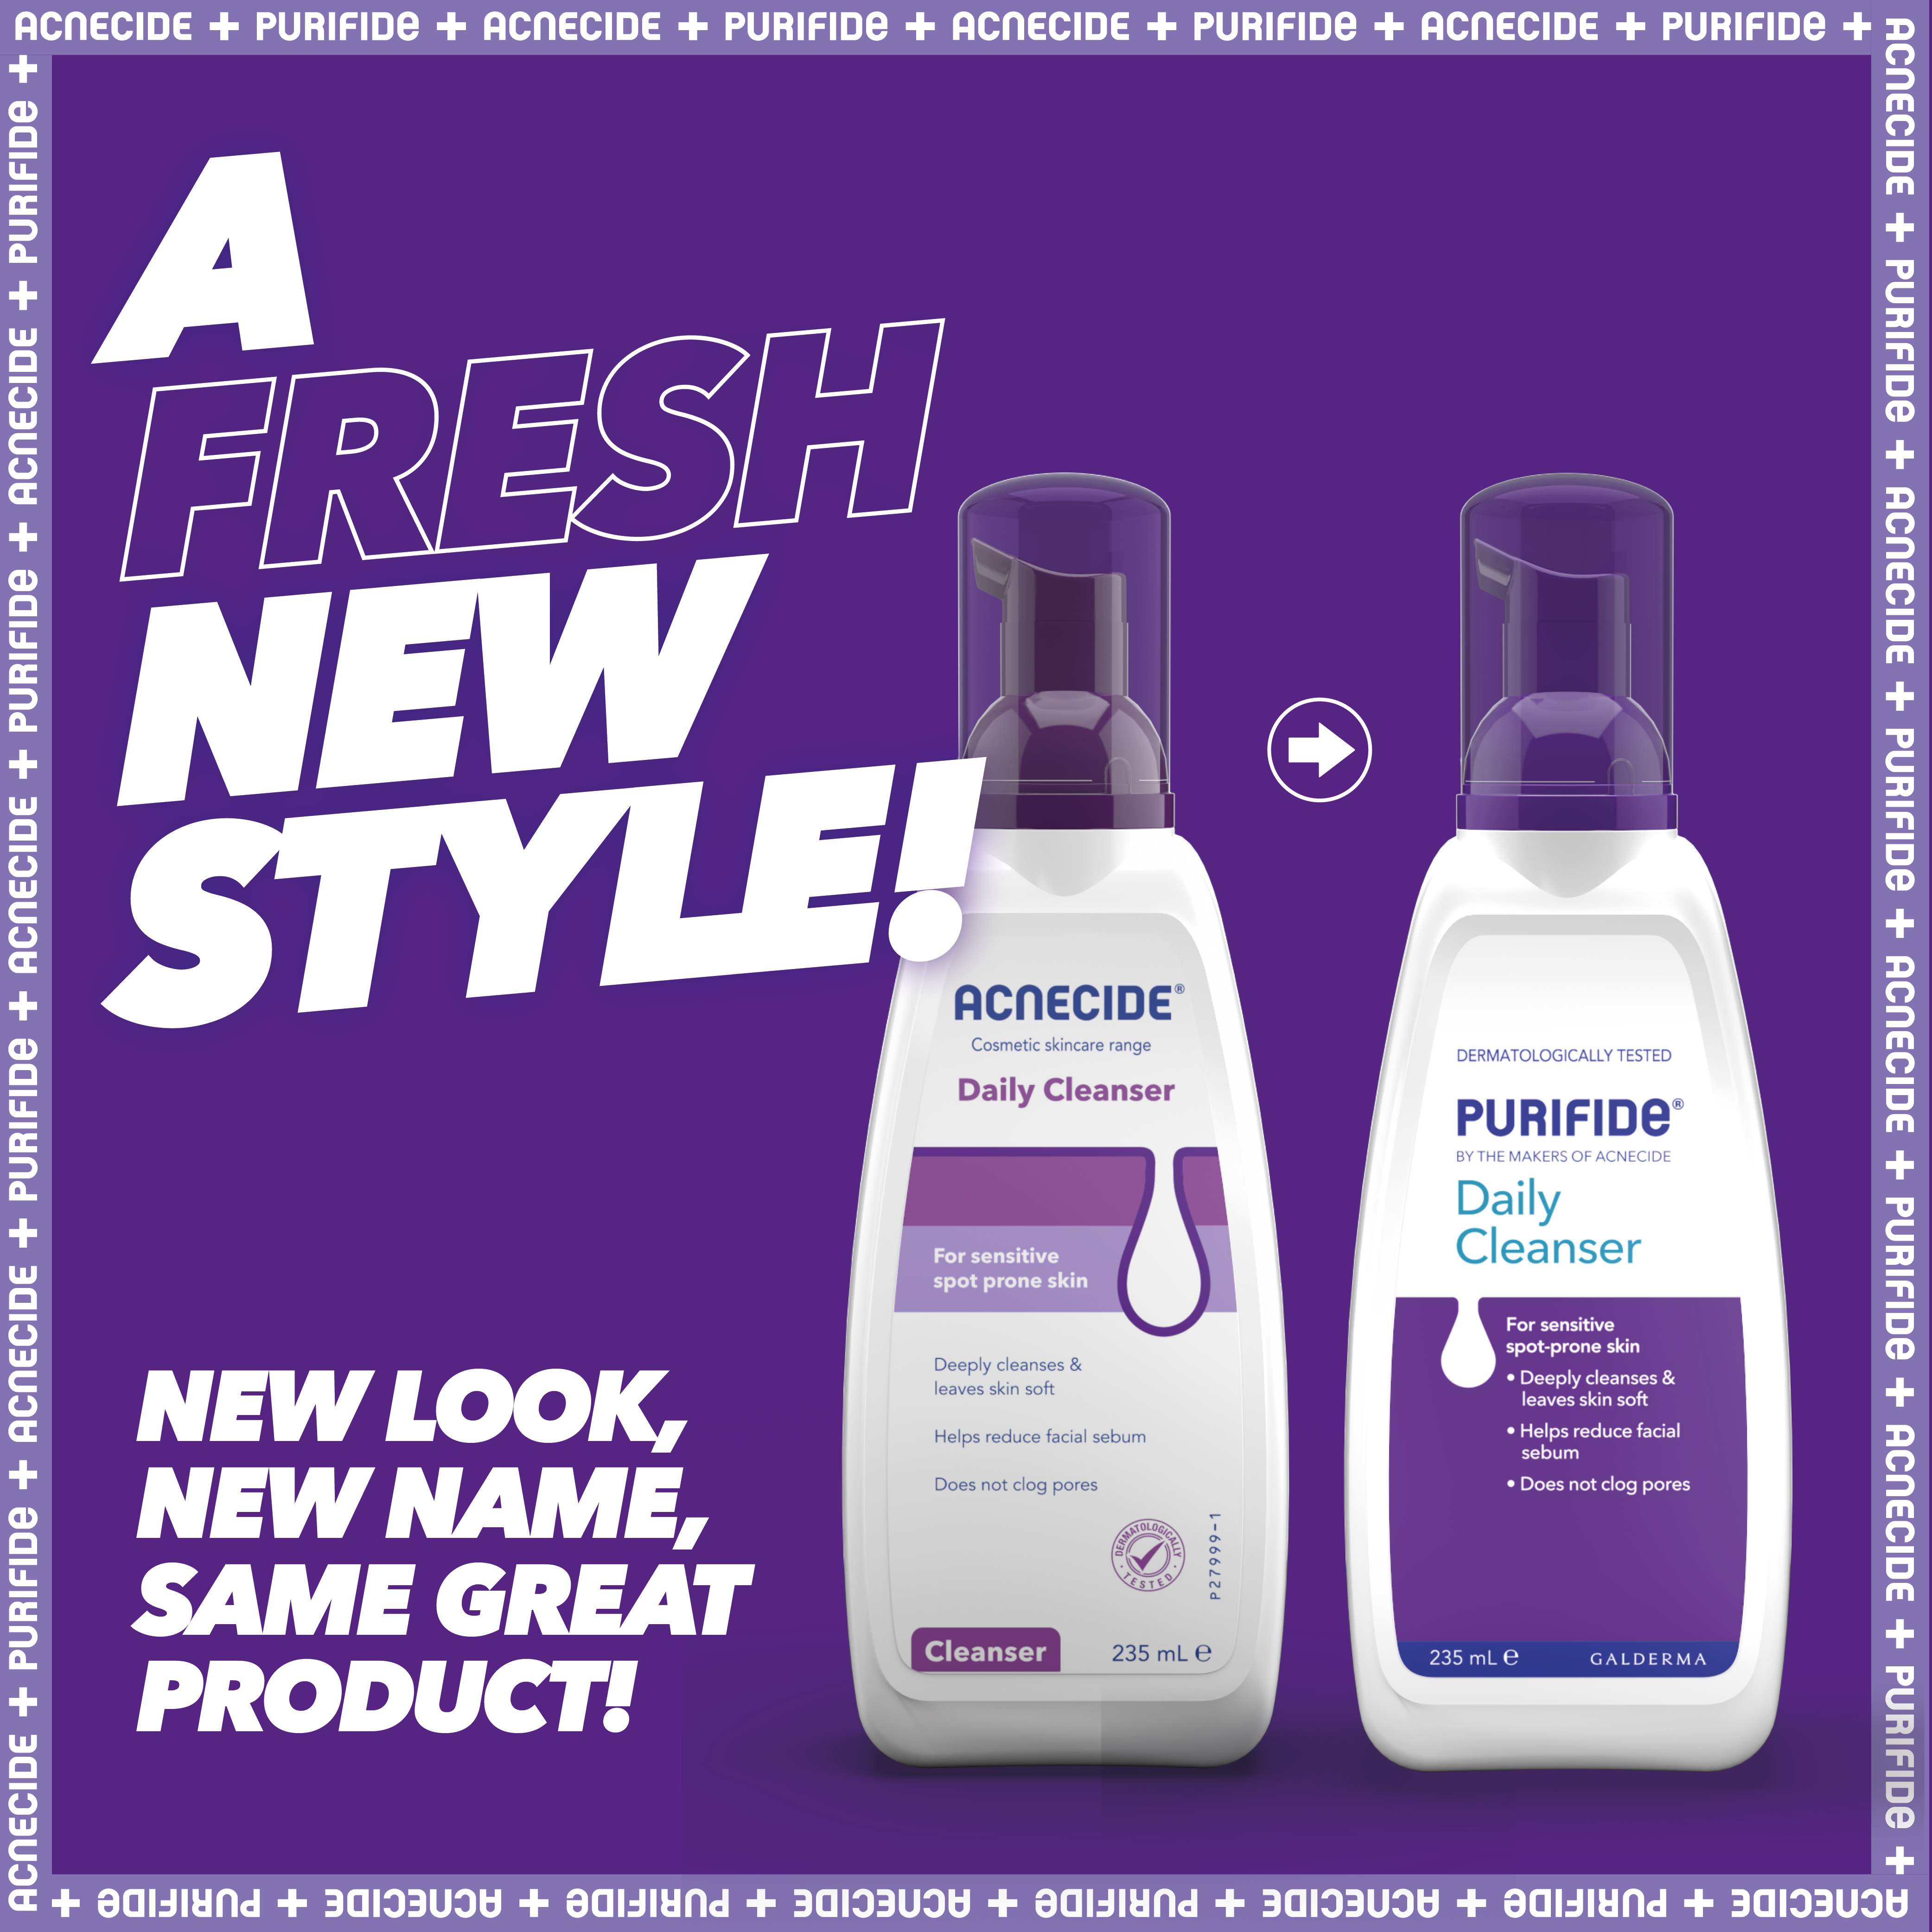 A fresh new style! New look, new name, same great product!